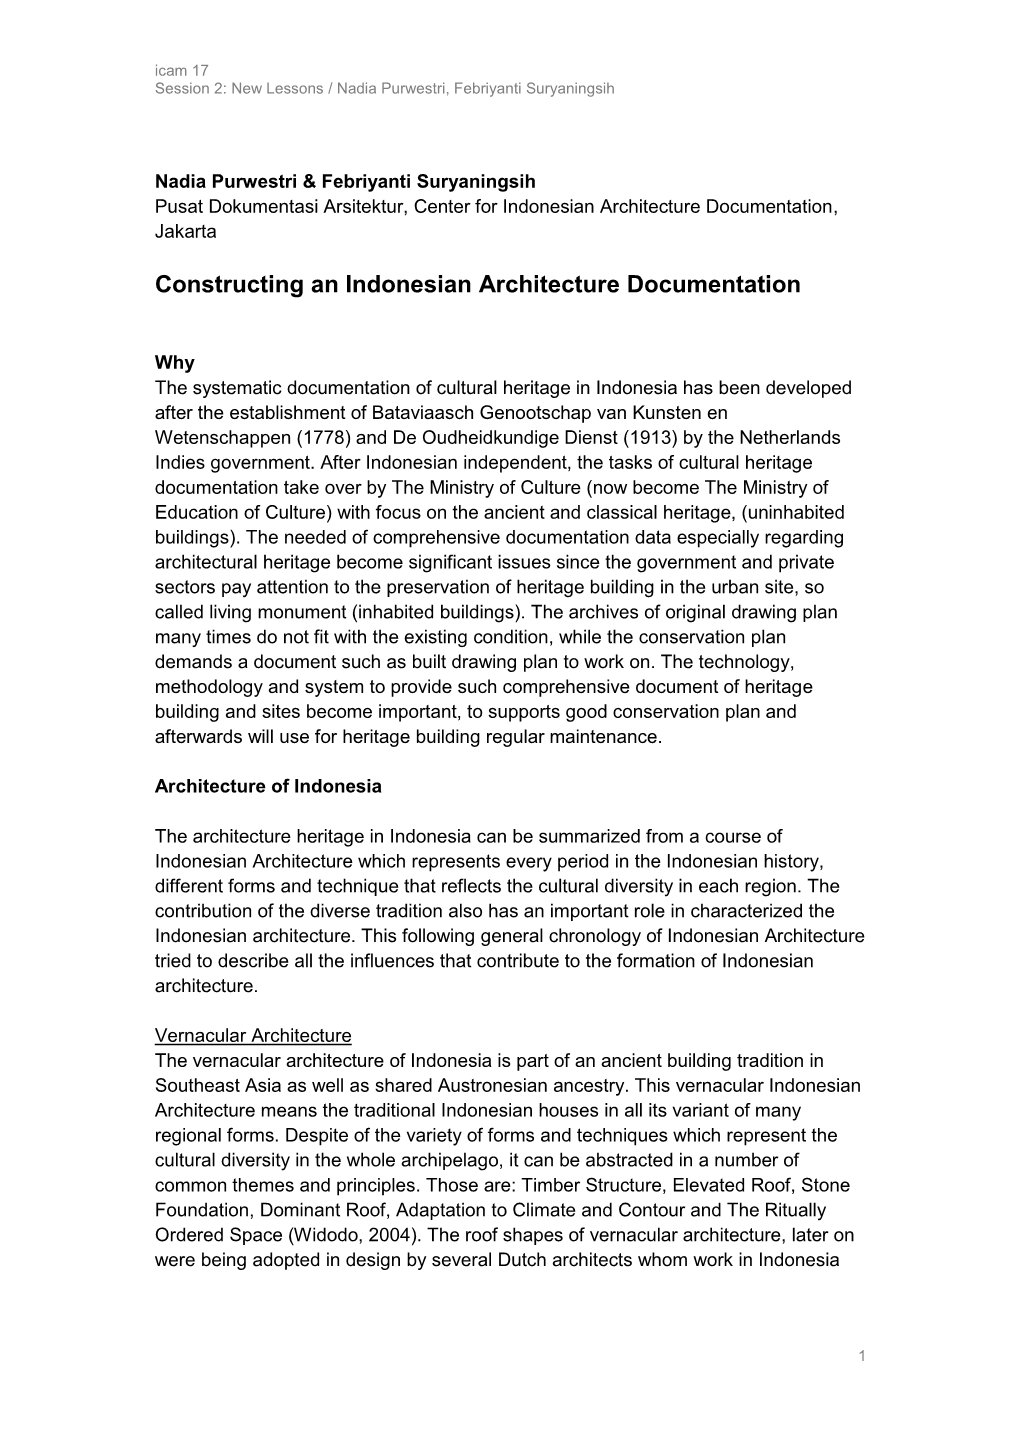 Constructing an Indonesian Architecture Documentation (PDF